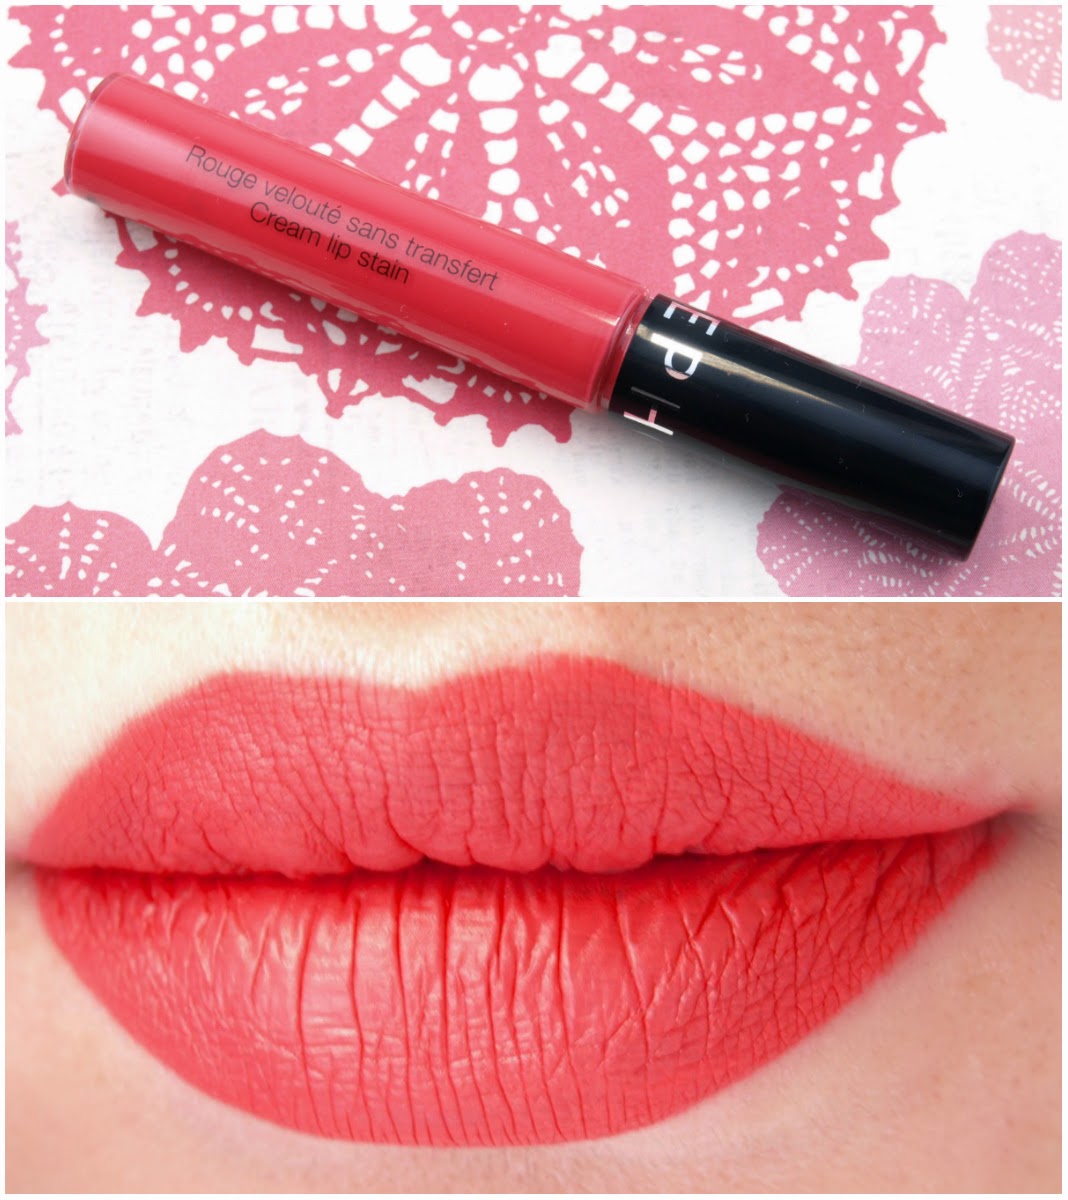 Sephora Collection Cream Lip Stain in "07 Cherry Blossom" & "09 Watermelon Slice": Review and Swatches